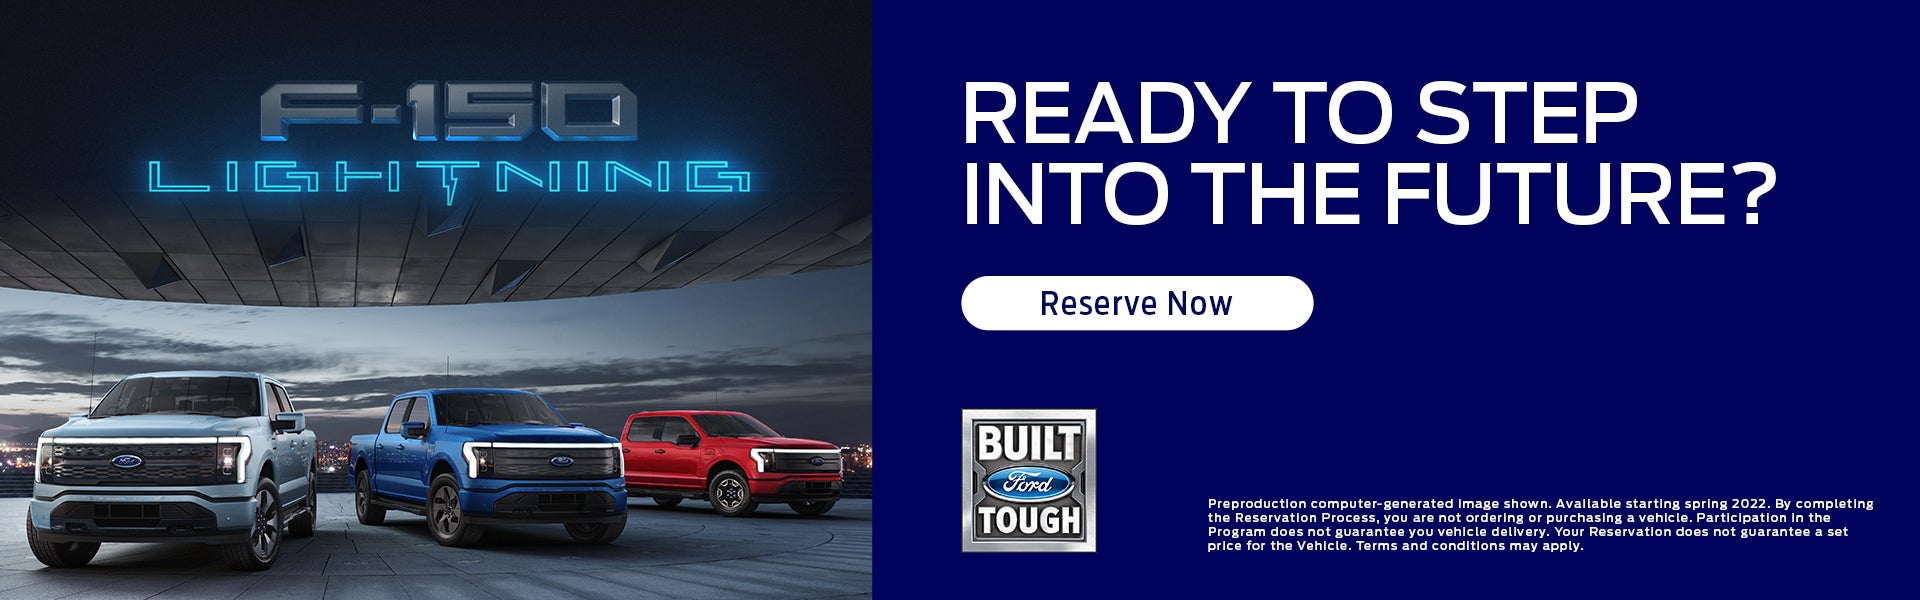 Reserve Your 2022 Ford Lightning Now